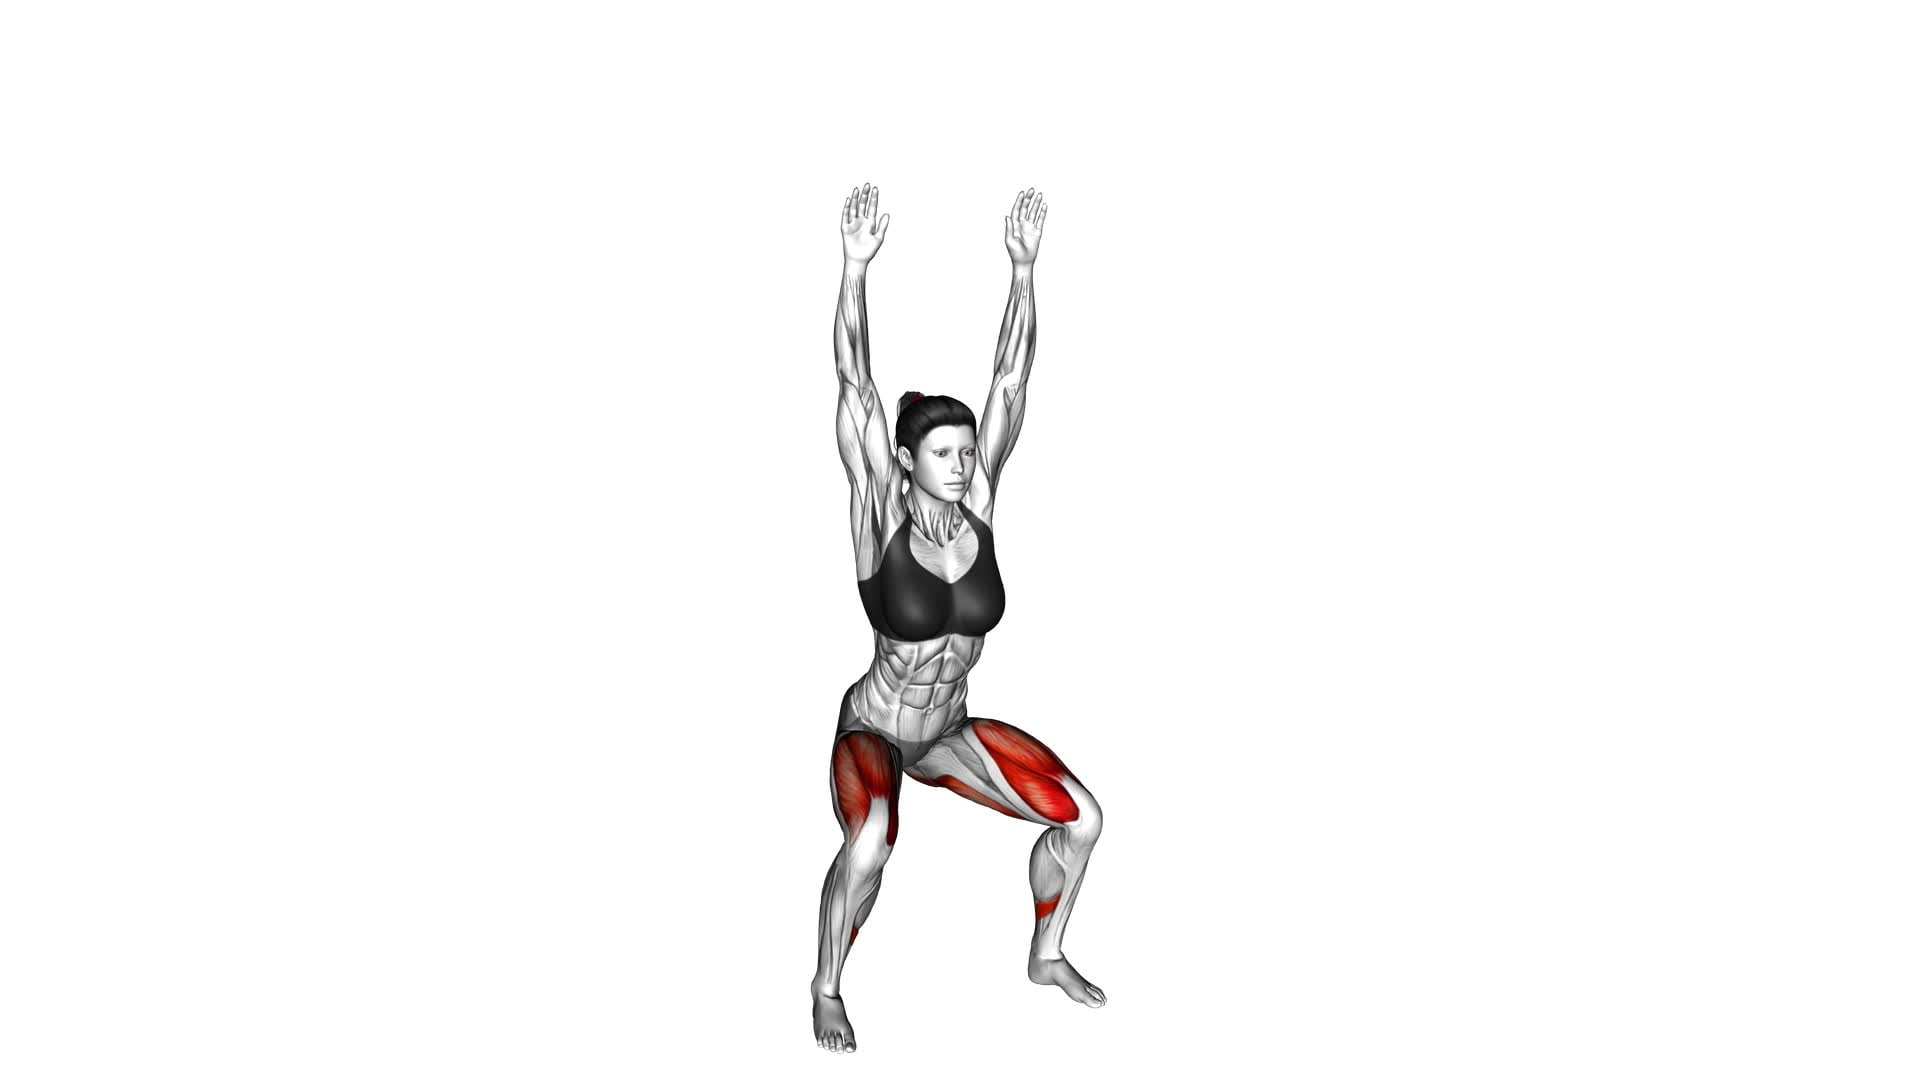 Bodyweight Overhead Squat (female) - Video Exercise Guide & Tips